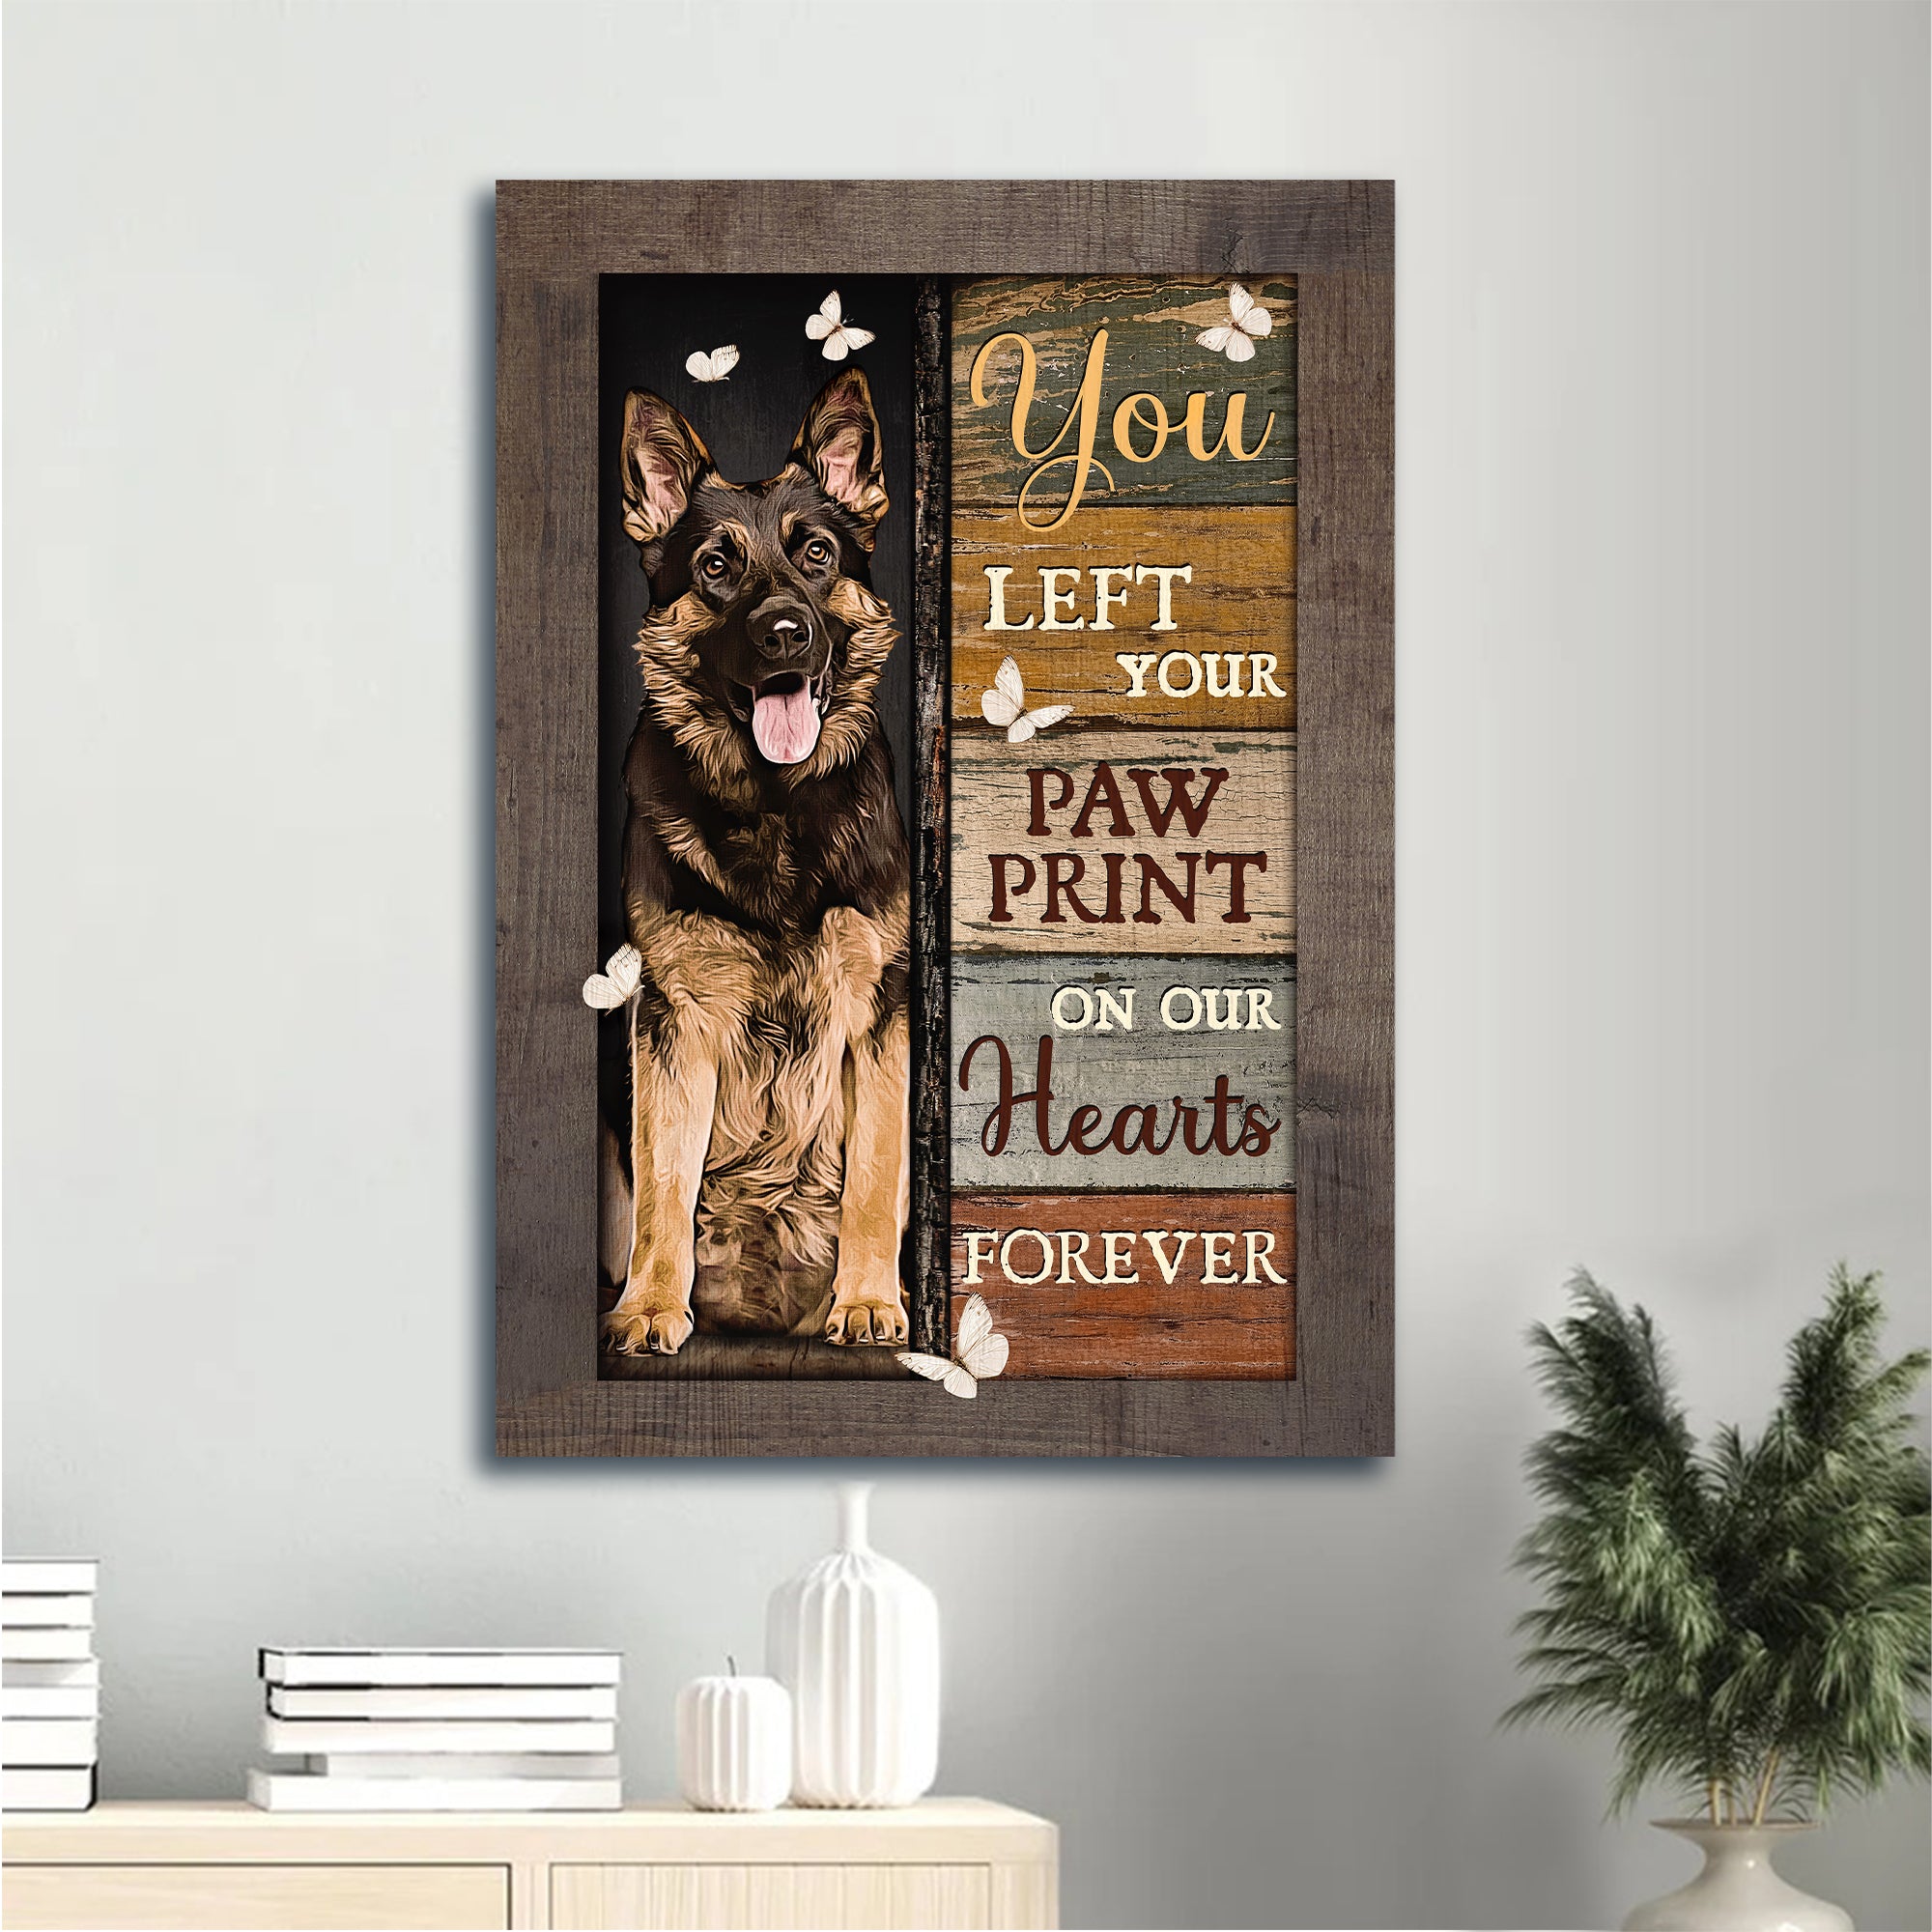 German Shepherd & Jesus Portrait Canvas - German Shepherd, White Butterfly, You Left Your Paw Print On Our Hearts - Gift For Dog Lovers, Christian